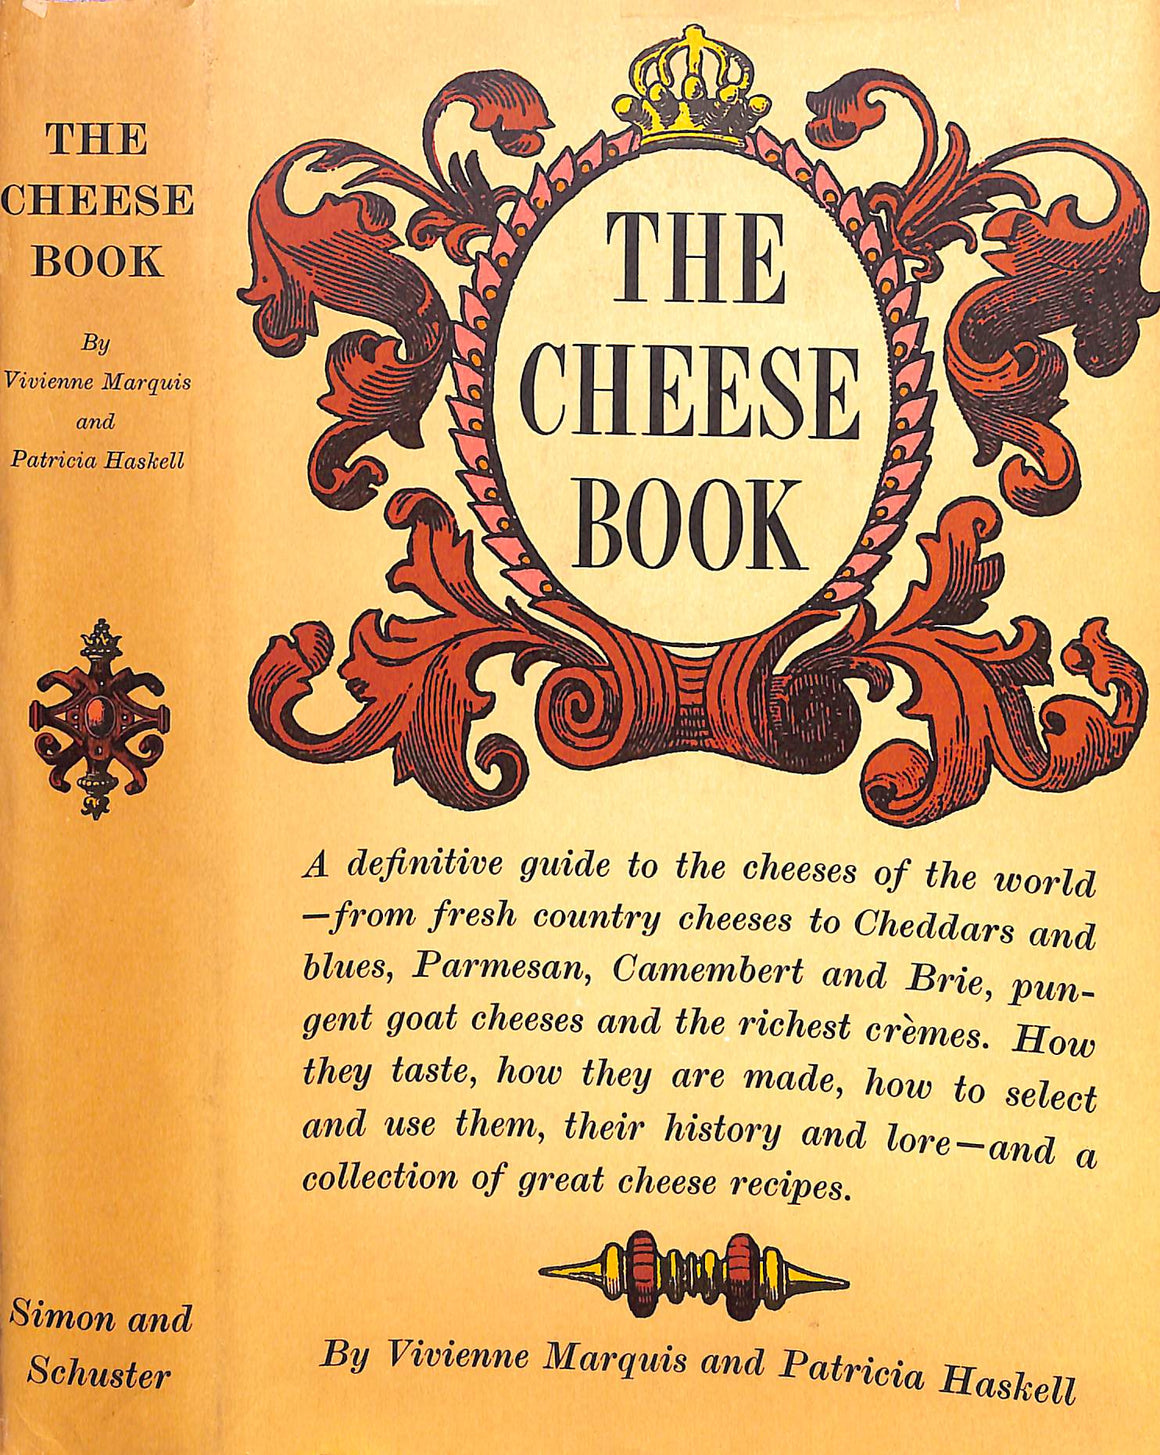 "The Cheese Book" 1965 MARQUIS, Vivienne and HASKELL, Patricia